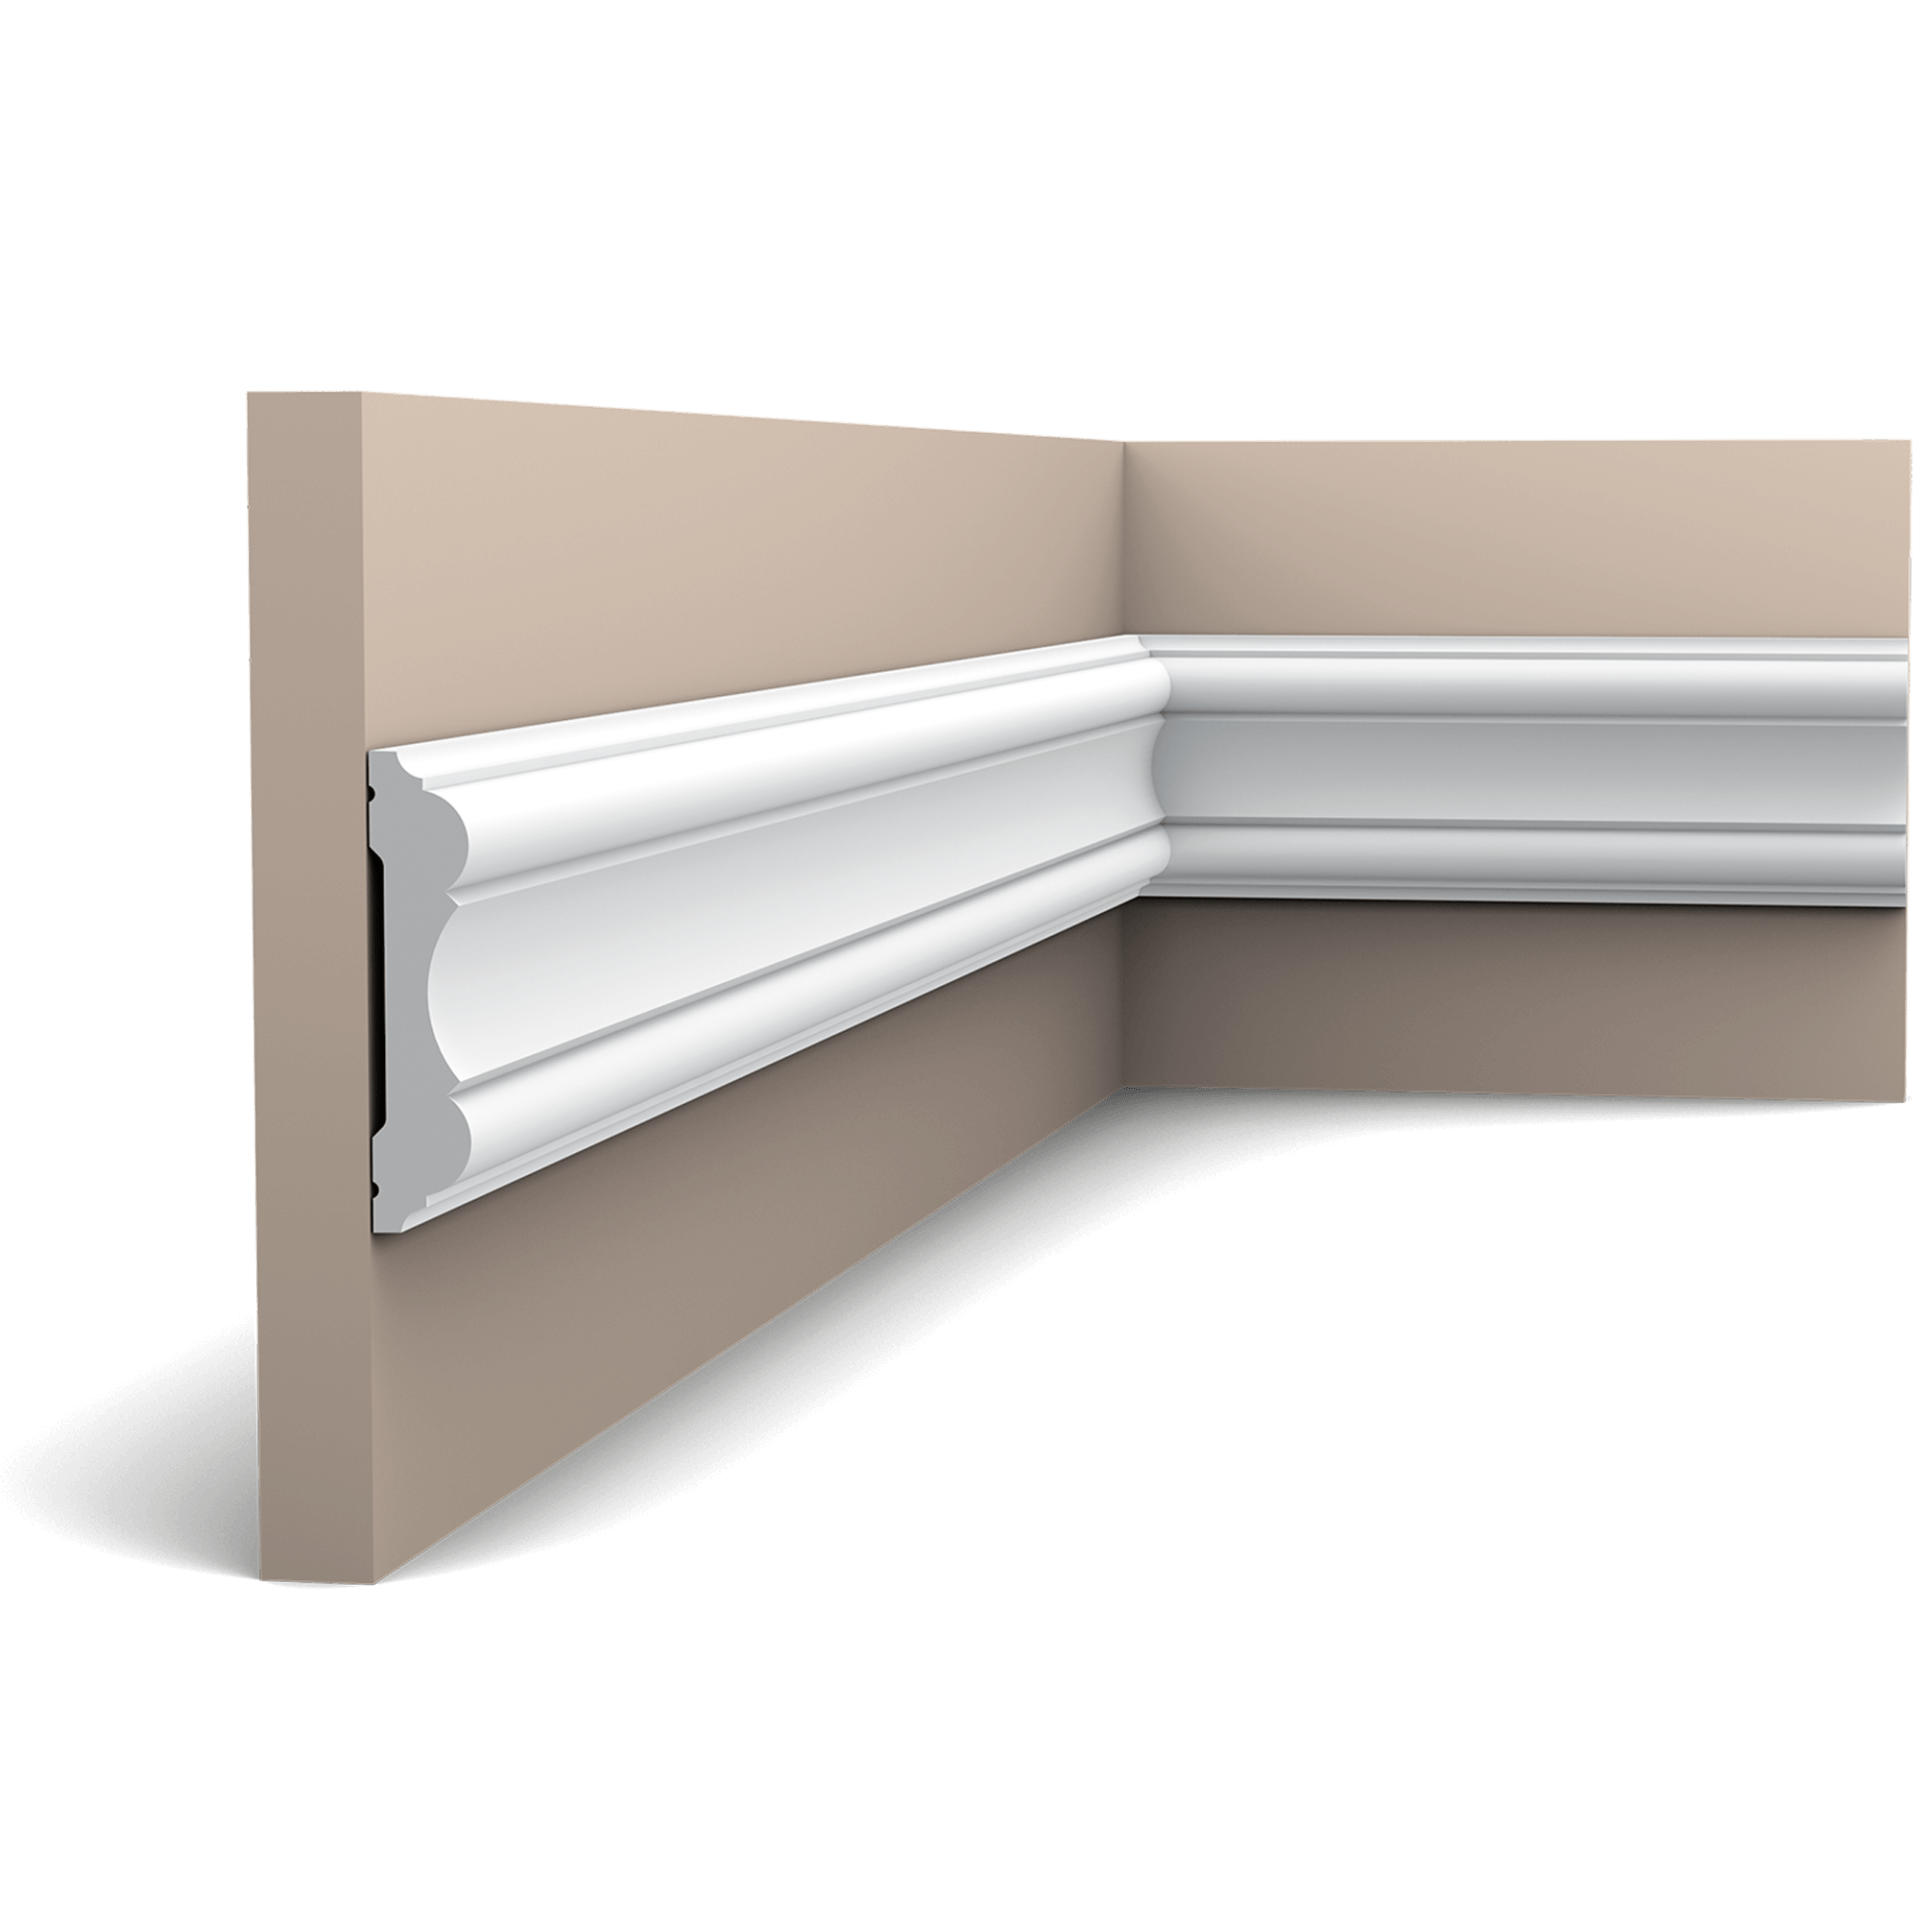 p8040 panel moulding 8b25 A very versatile classic symmetrical profile to ornament walls and ceilings alike. Use panel mouldings to create wall frames or wainscoting and give your space a little something extra.